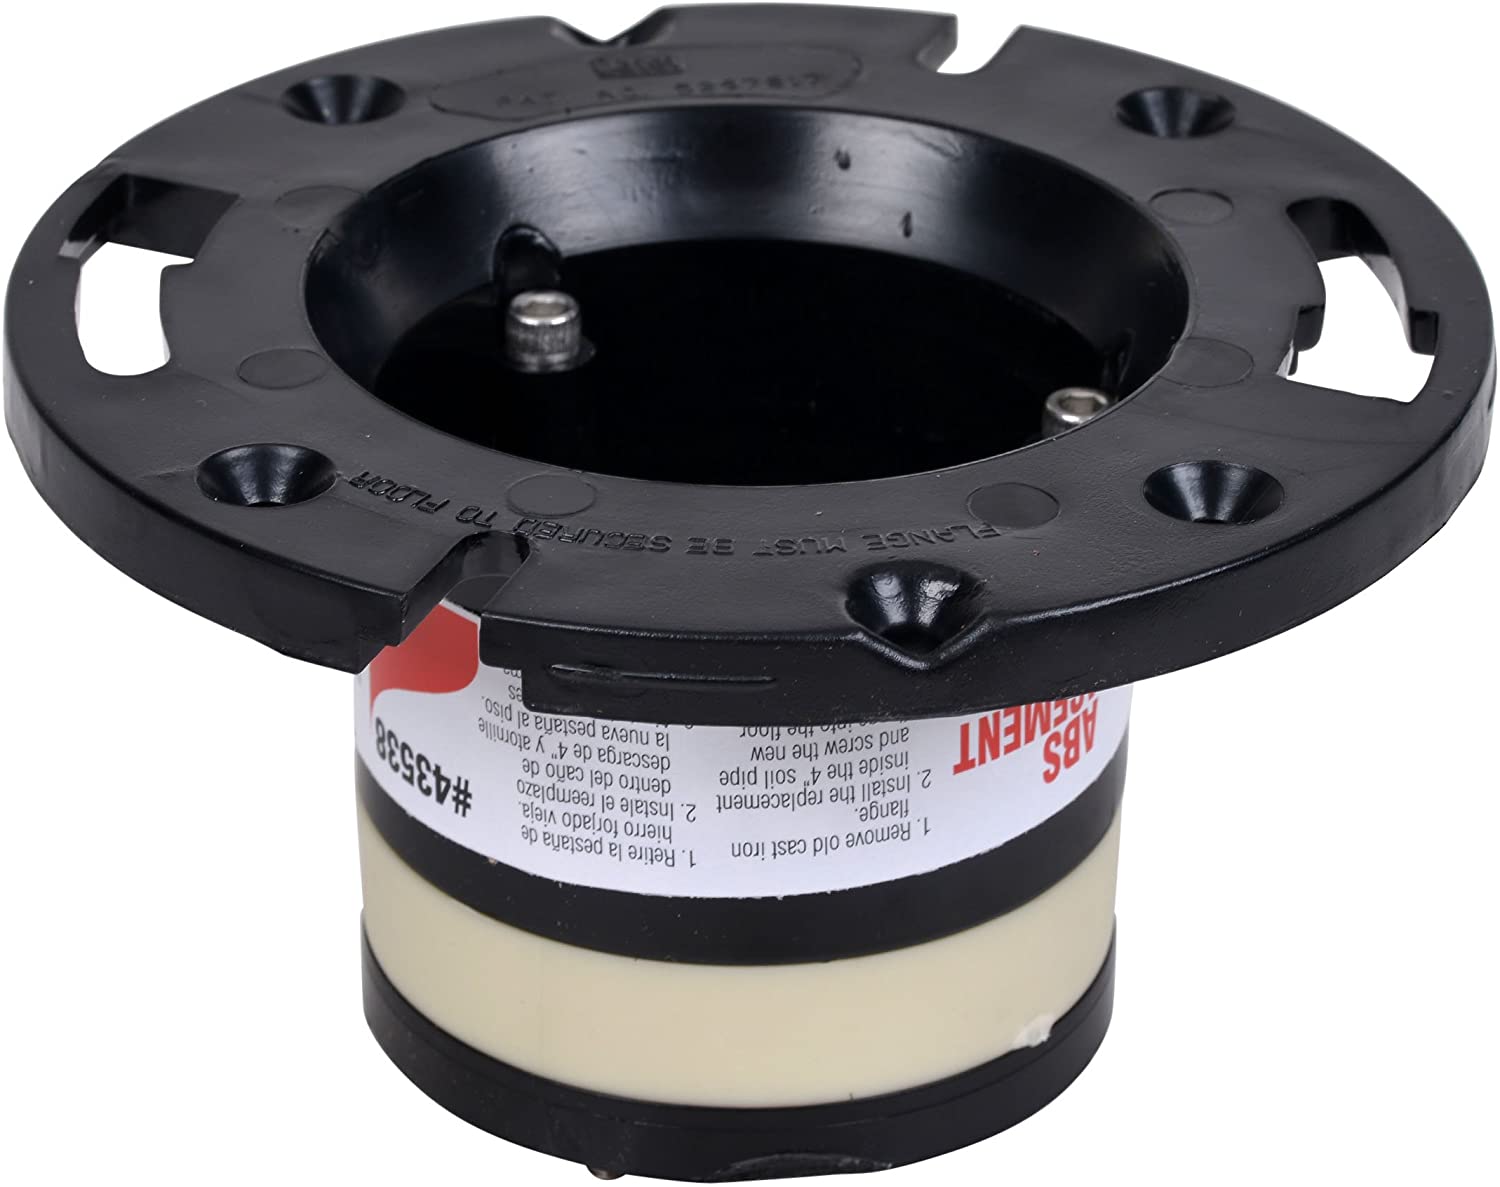 Oatey 43538 ABS Cast Iron Flange Replacement